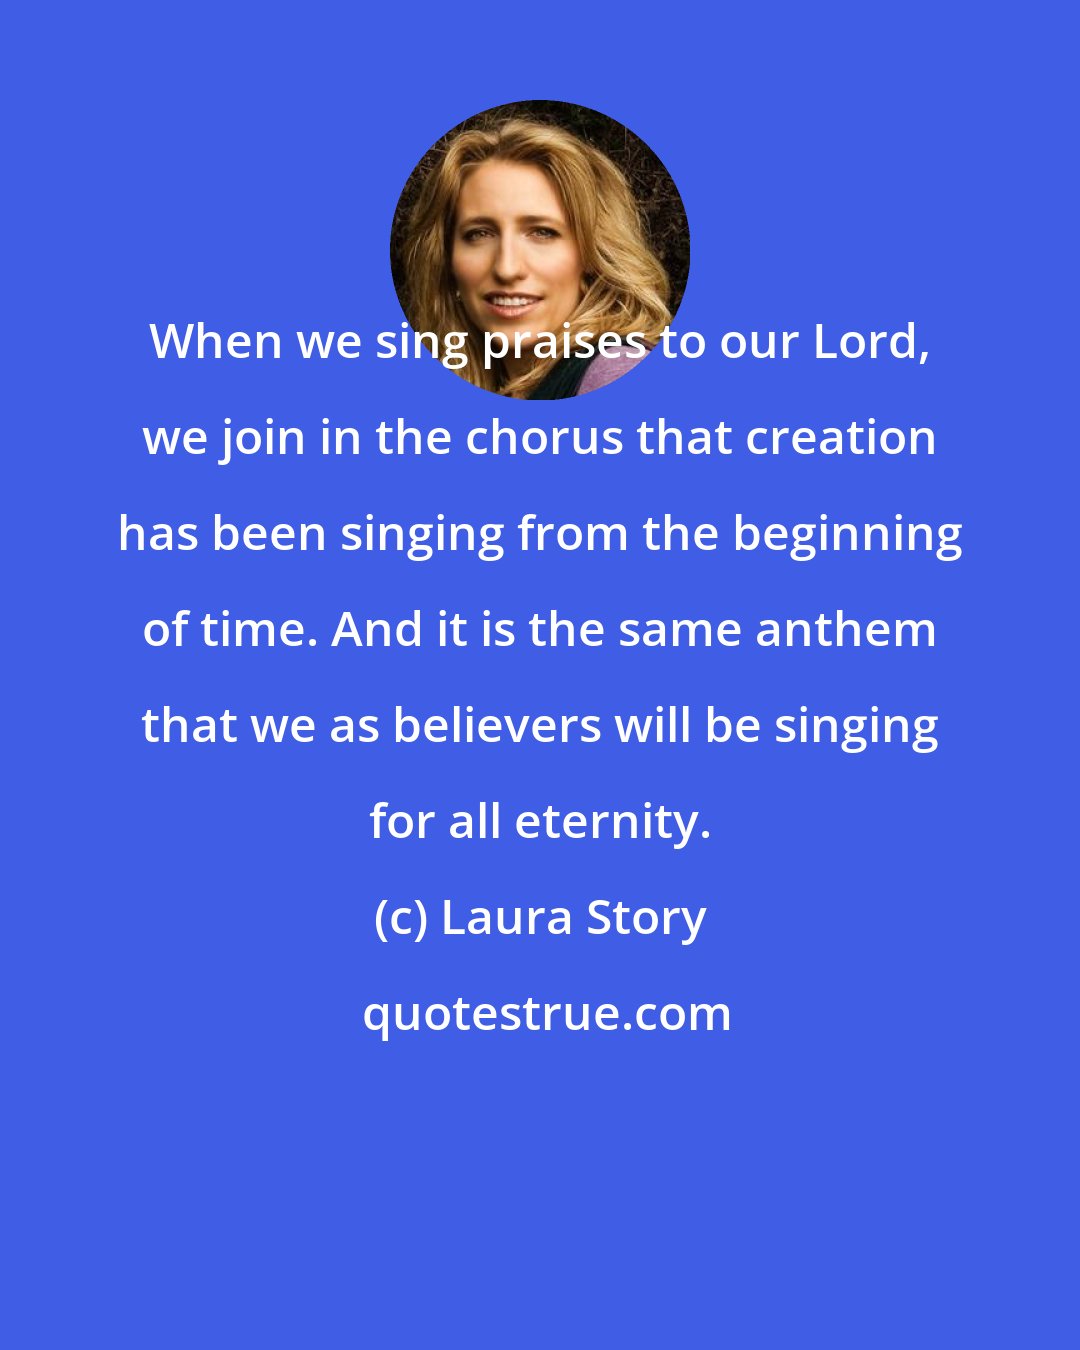 Laura Story: When we sing praises to our Lord, we join in the chorus that creation has been singing from the beginning of time. And it is the same anthem that we as believers will be singing for all eternity.